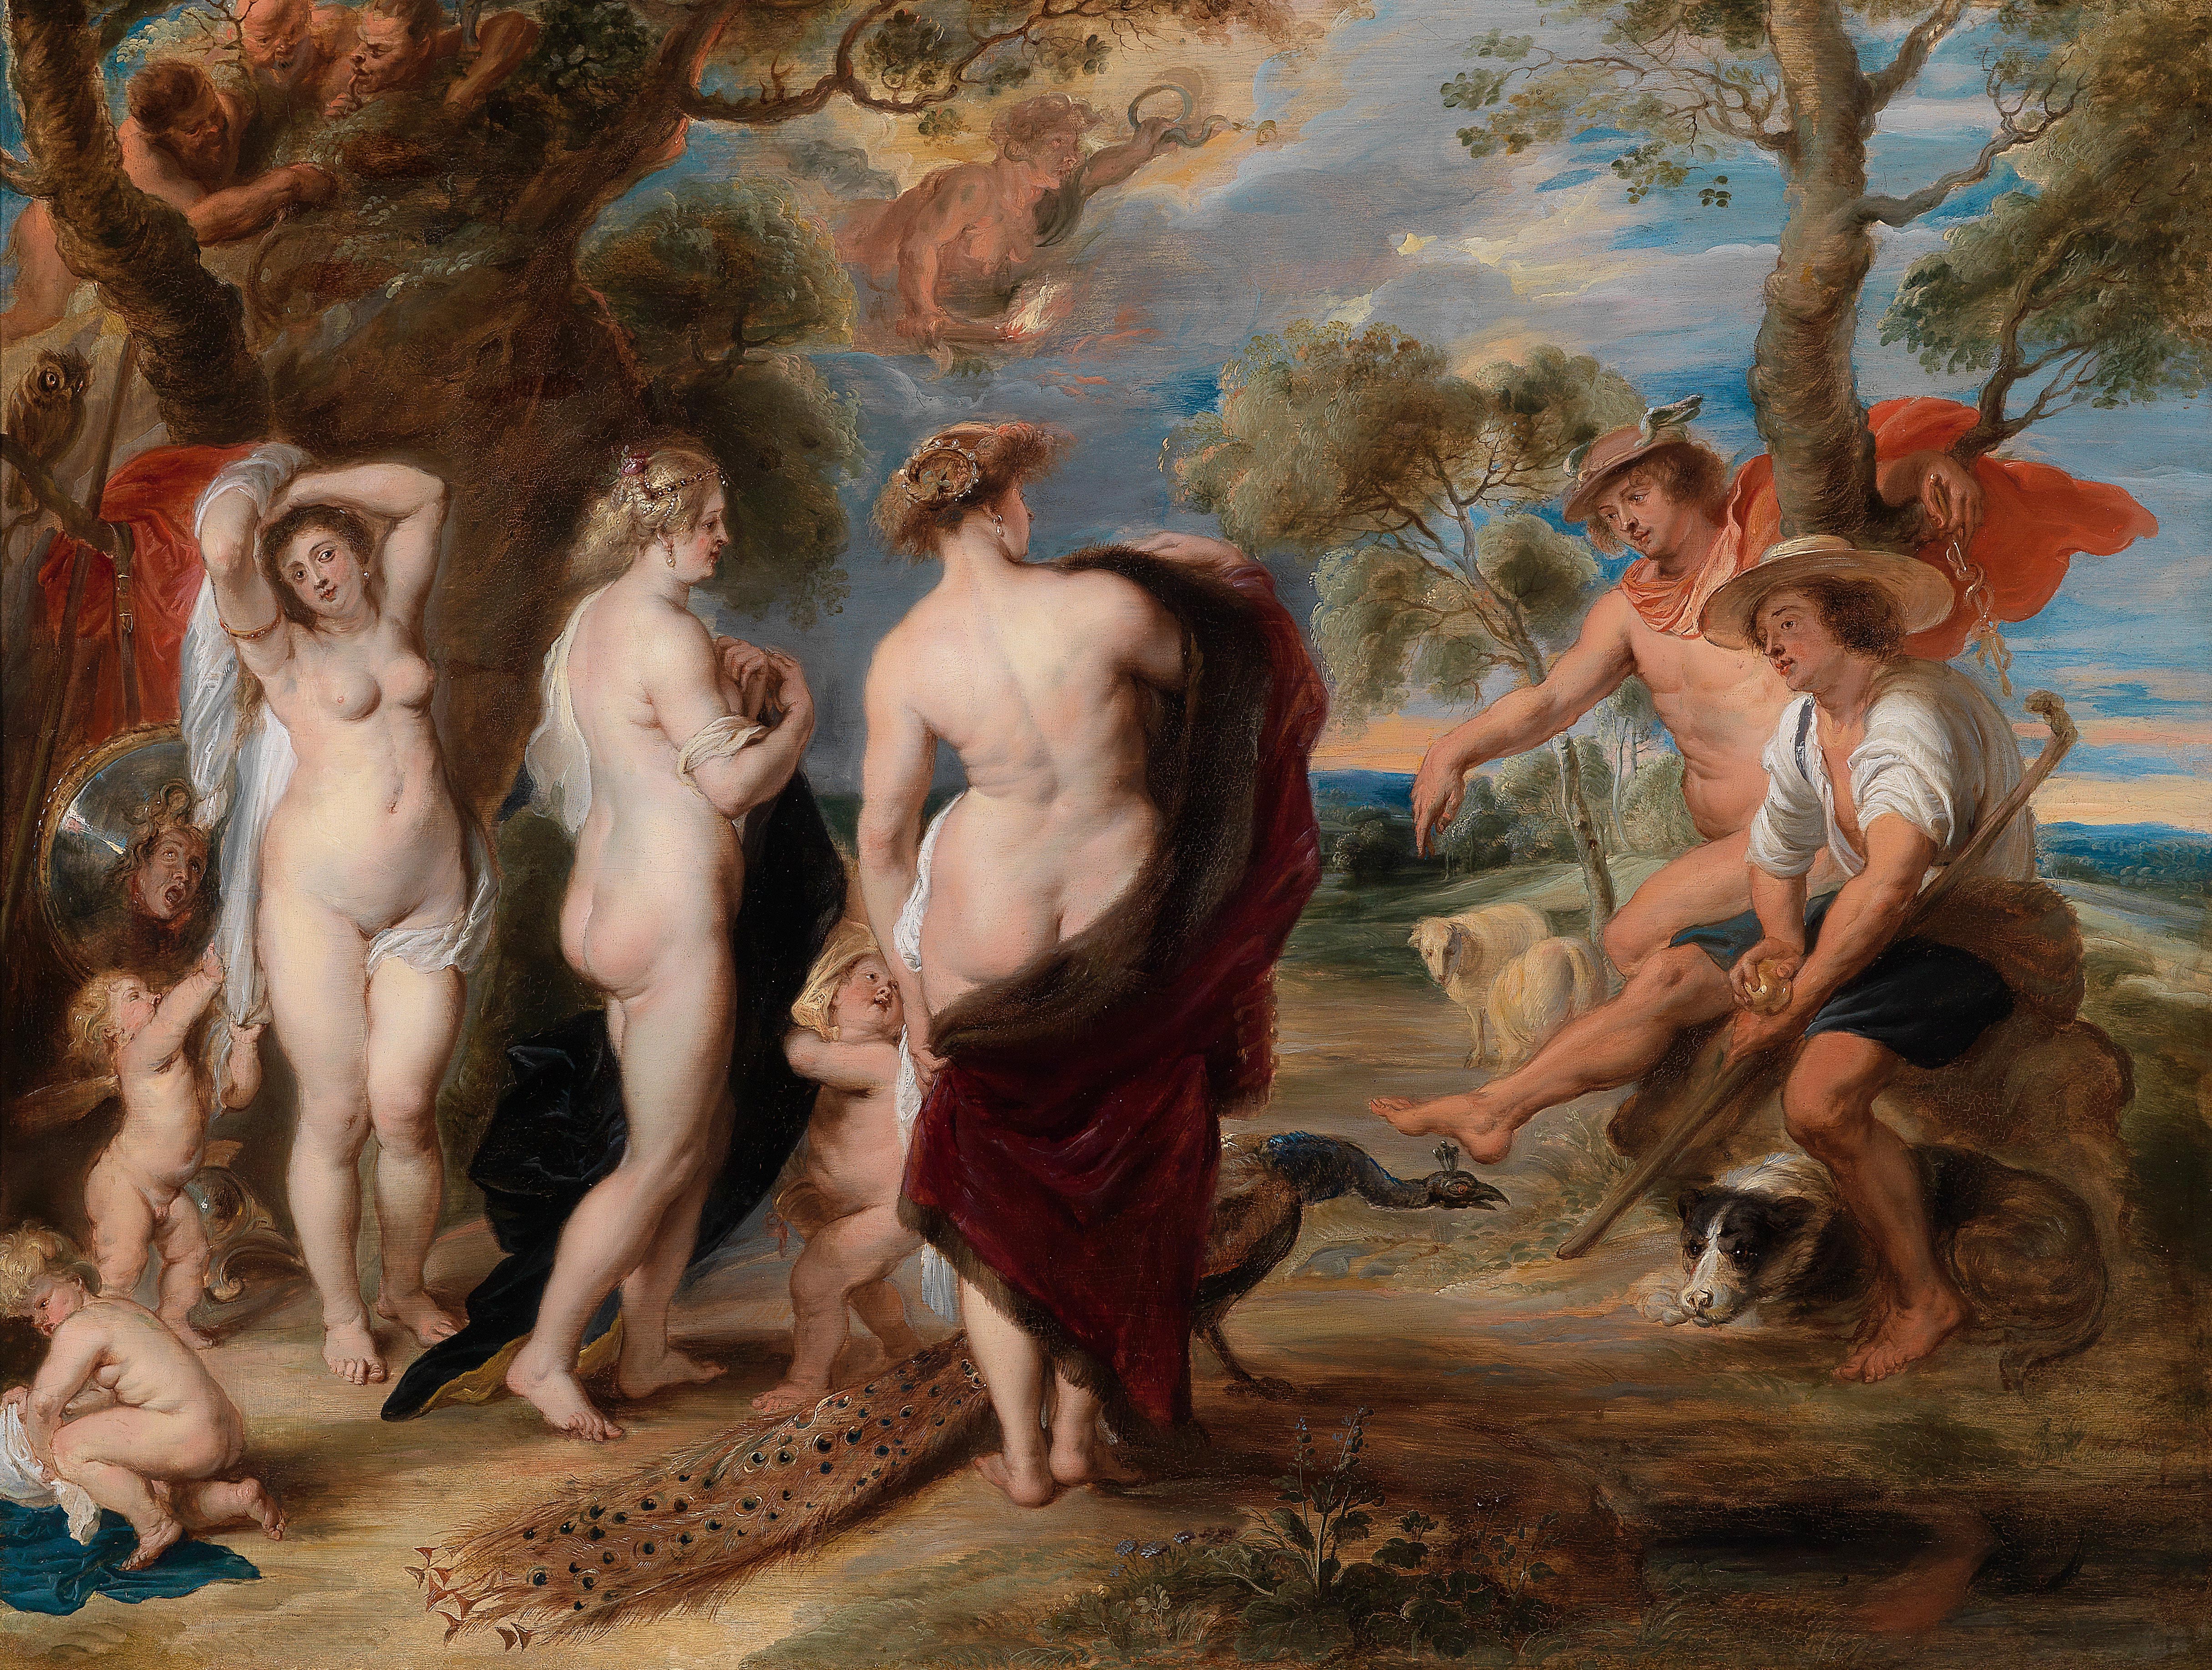 The Judgment of Paris by Peter Paul Rubens - 1636 - 145 x 194 cm National Gallery